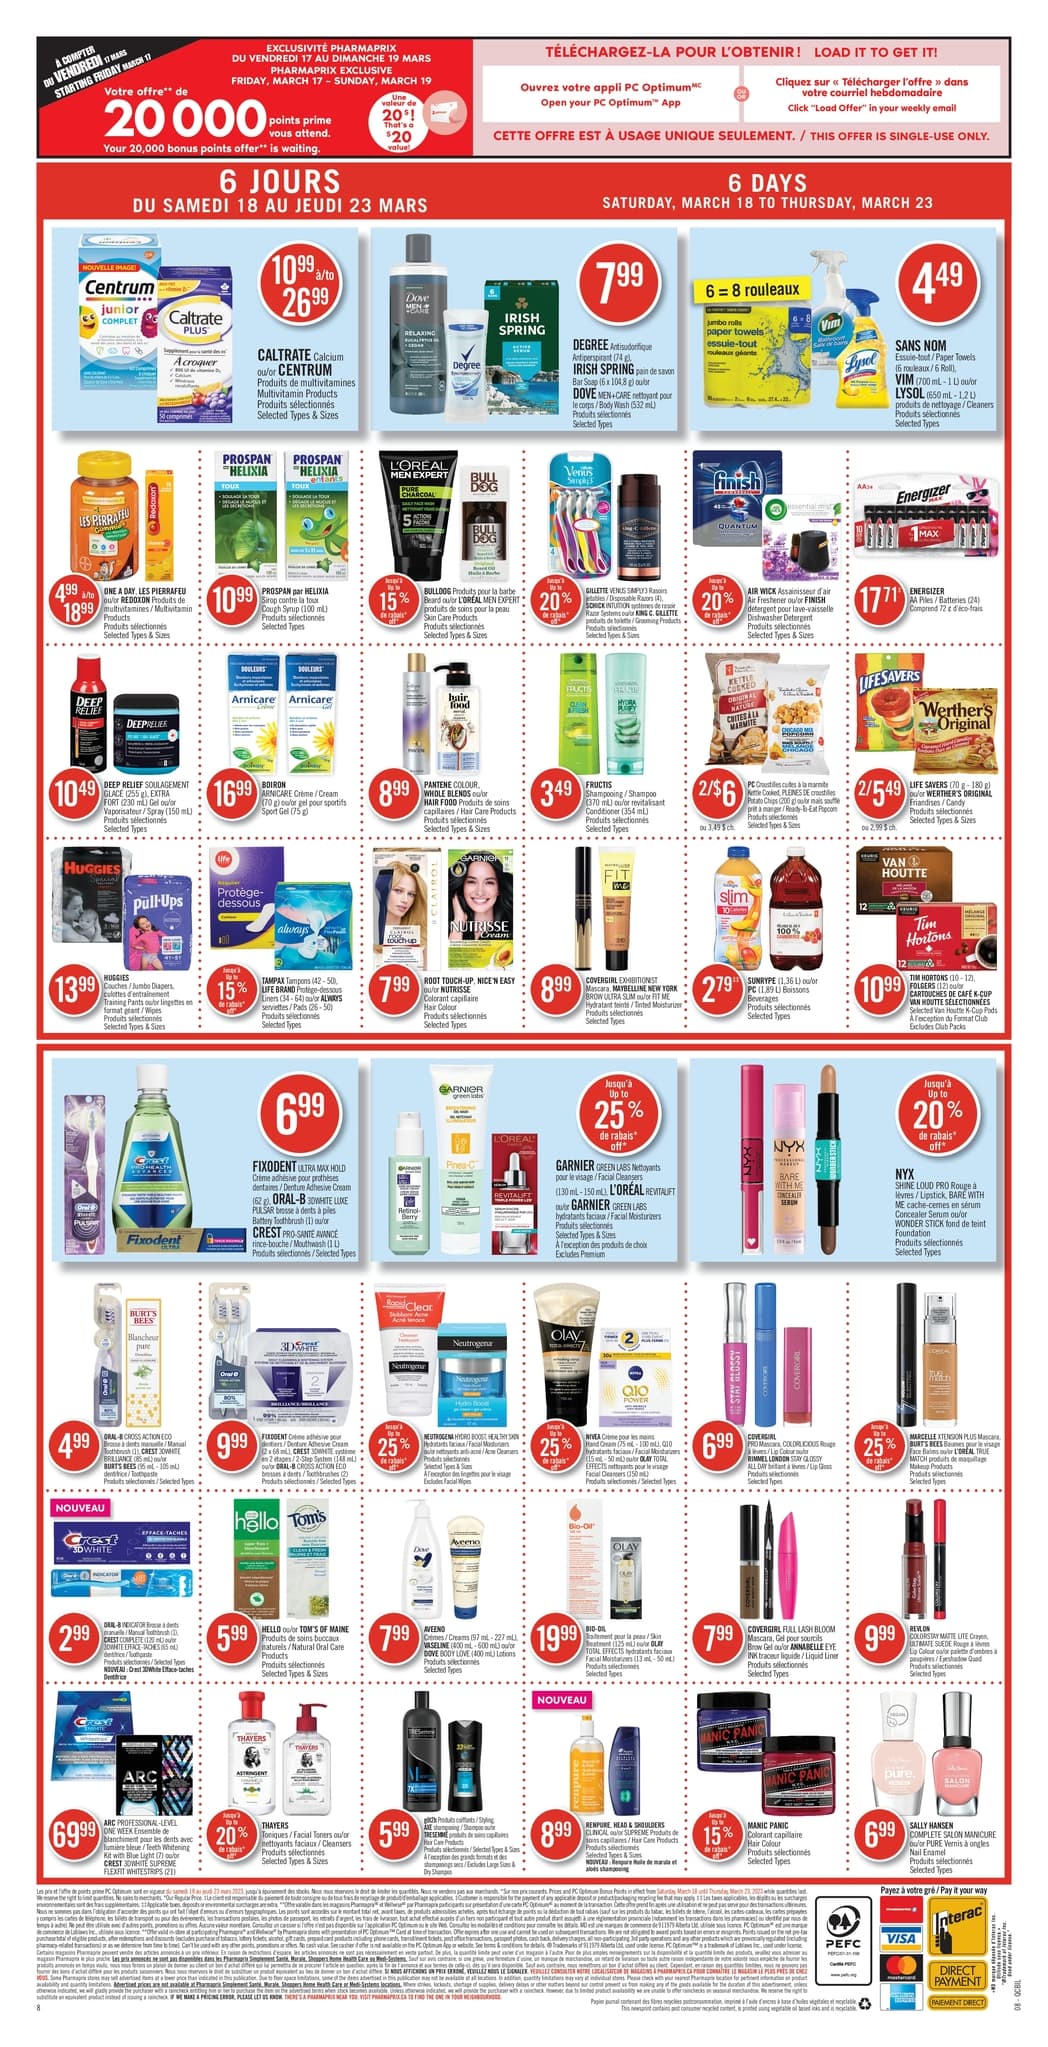 Pharmaprix - Weekly Flyer Specials - Page 14